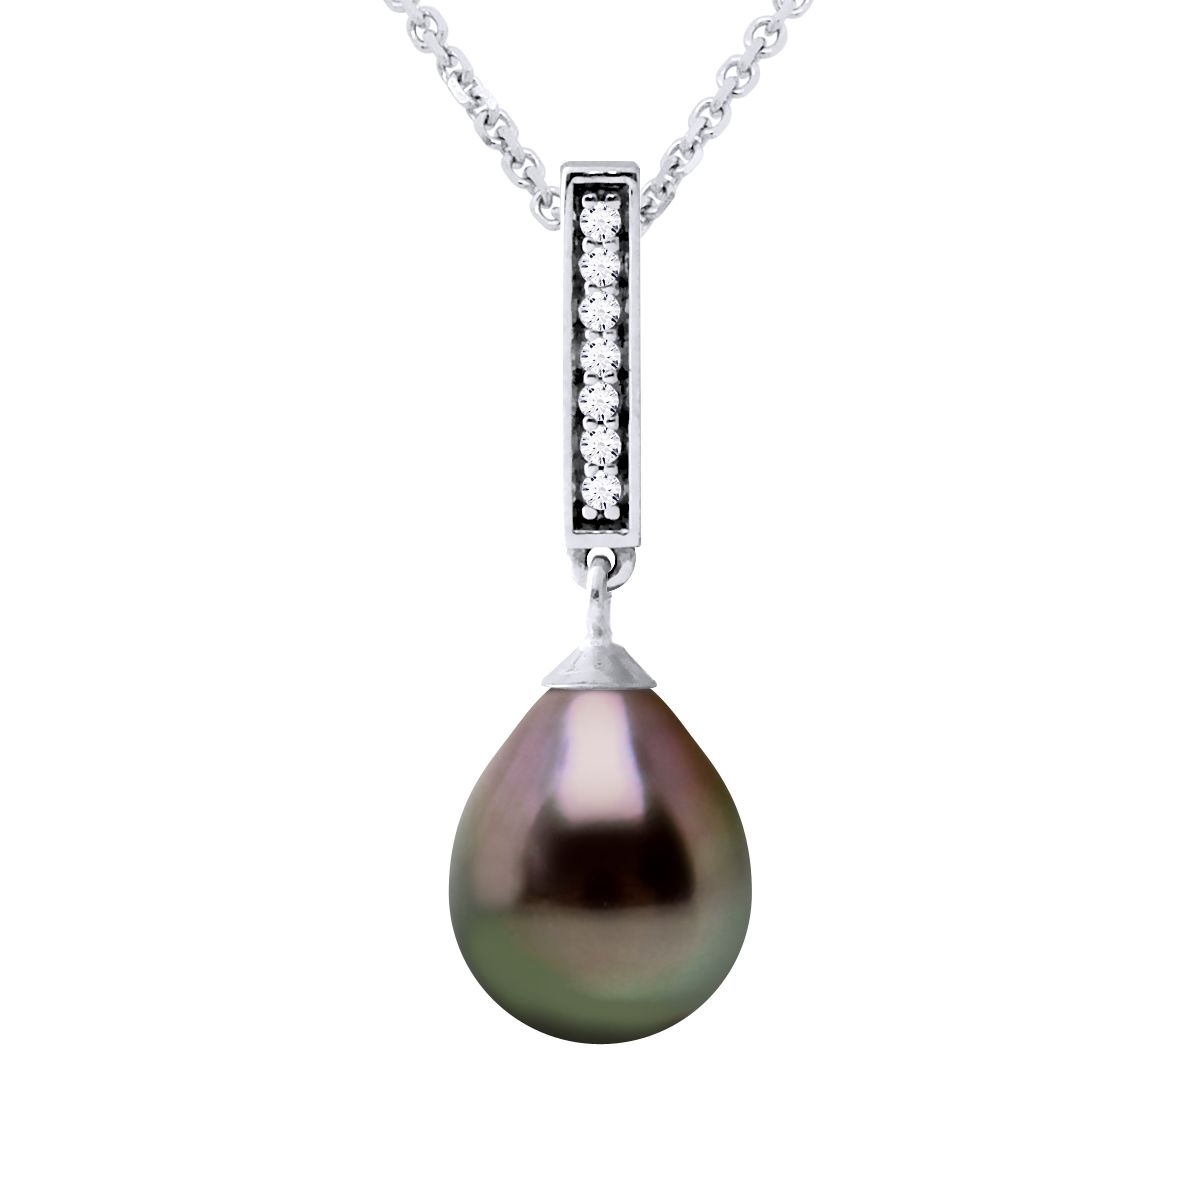 Necklace made with Cultured Tahitian Pearl Pear Shape 8-9 mm , 0,31 in - Stem Adorned of zirconium oxide chain mesh 925 Sterling Silver Rhodium-plated Length 42 cm , 16,5 in - Our jewellery is made in France and will be delivered in a gift box accompanied by a Certificate of Authenticity and International Warranty